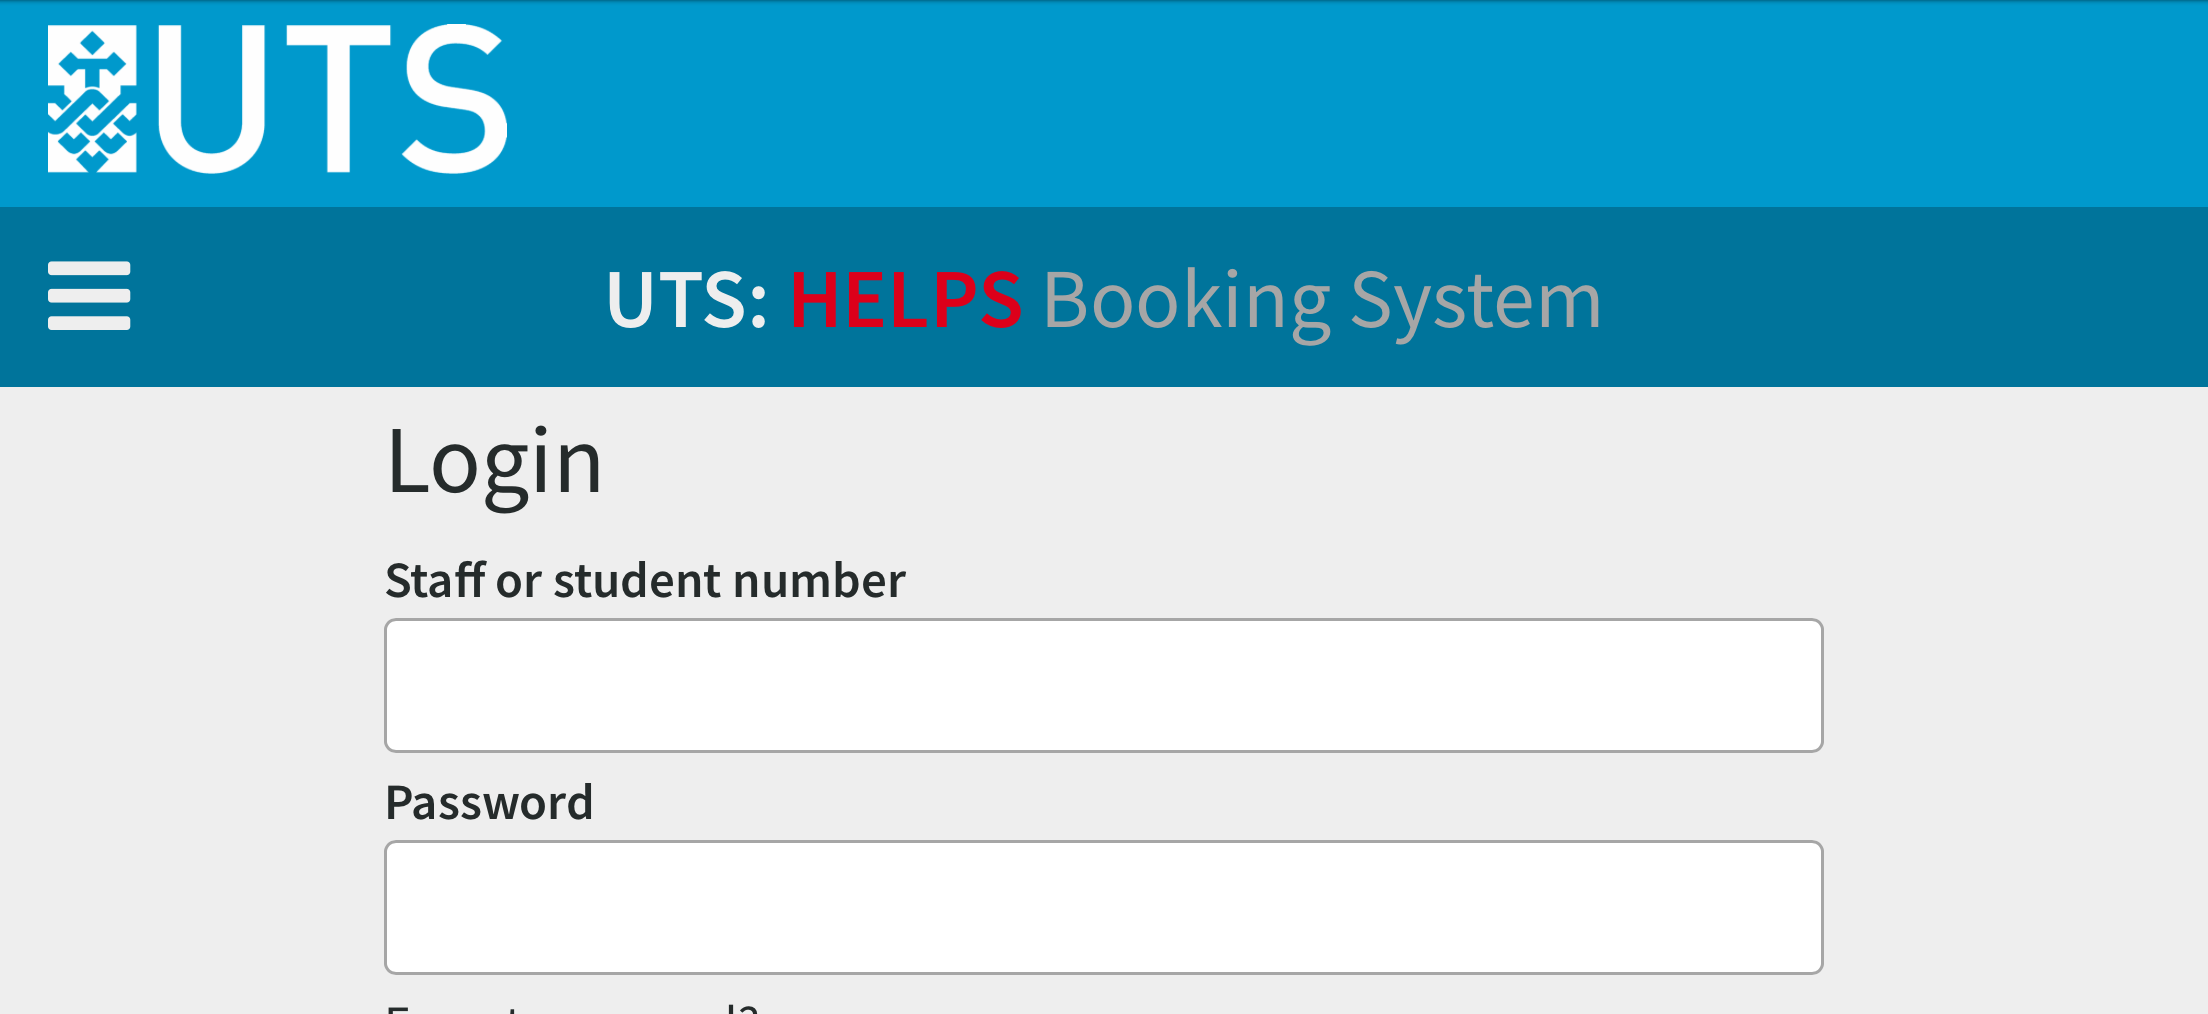 UTS: HELPS Booking System - Login